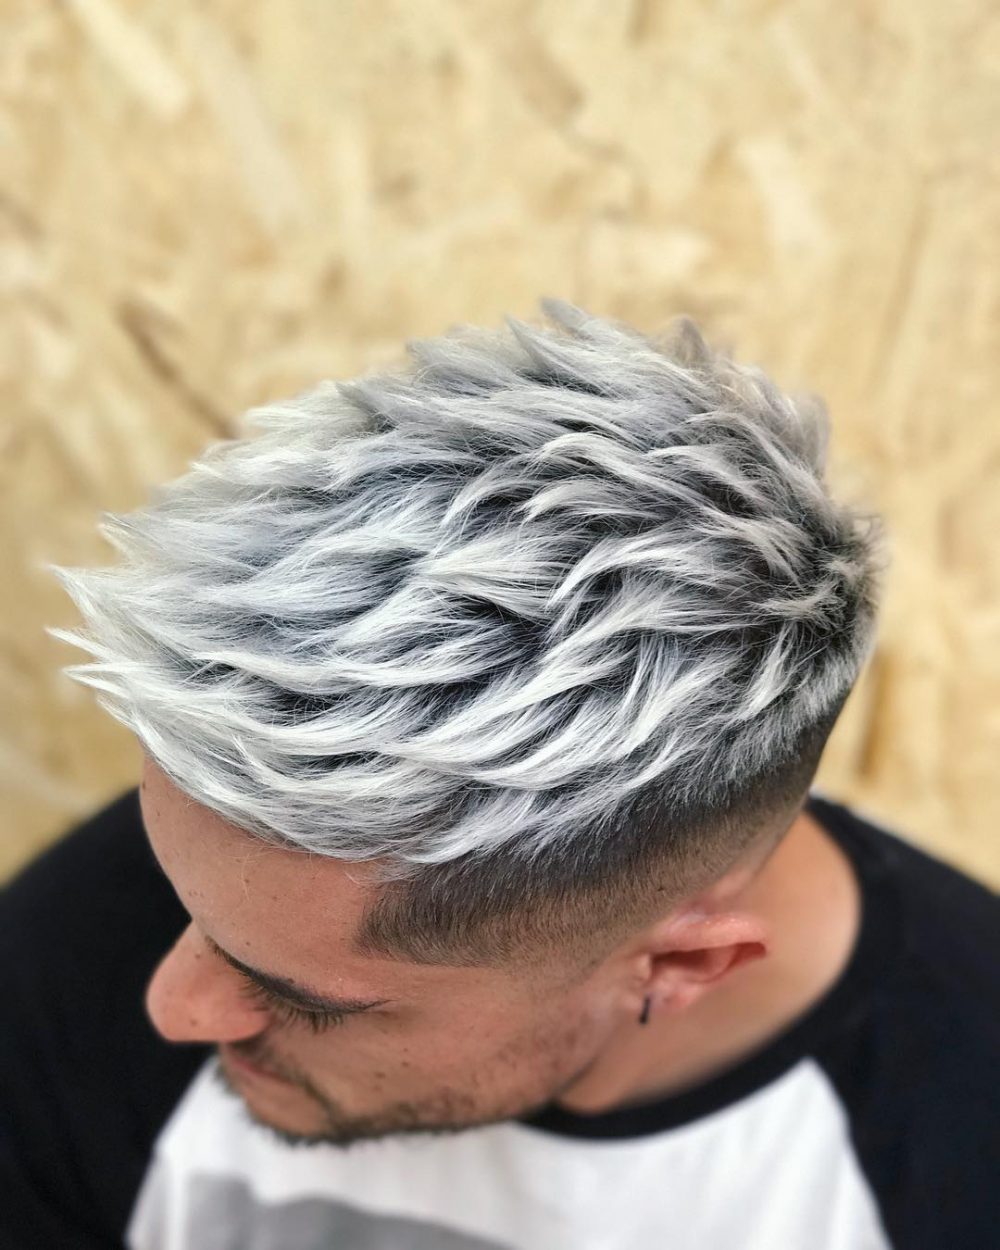 Wavelength Salon  Mens Hair highlights and Global Hair color Dont miss  the trend Drop at our Salon to get the new style Book your appointment   6290192038 Salon location  Kankurgachi 